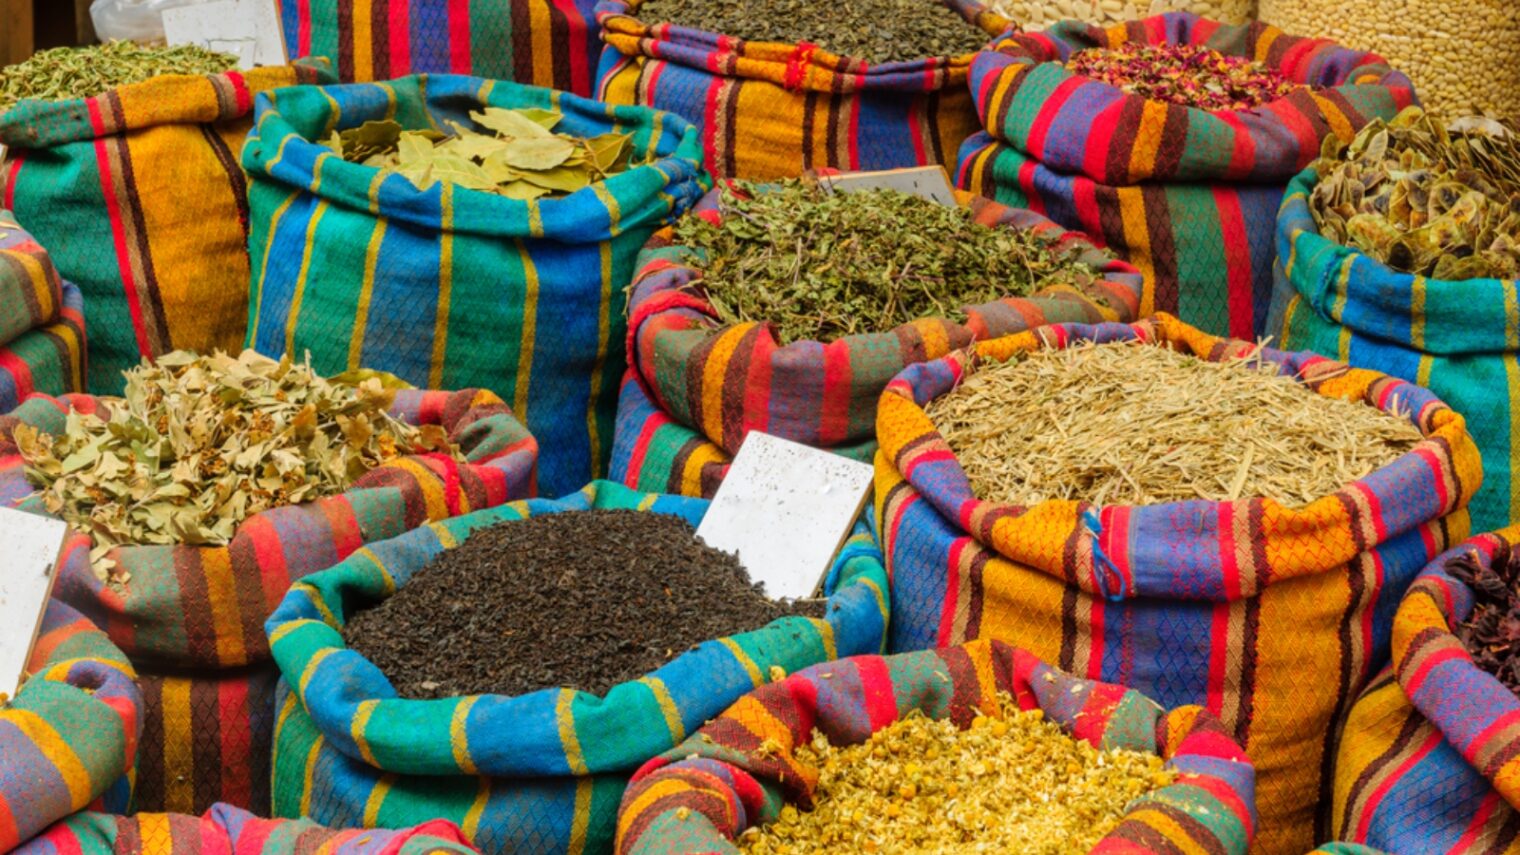 Spices in colorful sacks on sale in the market in Acre (Akko). Photo by RnDmS via Shutterstock.com